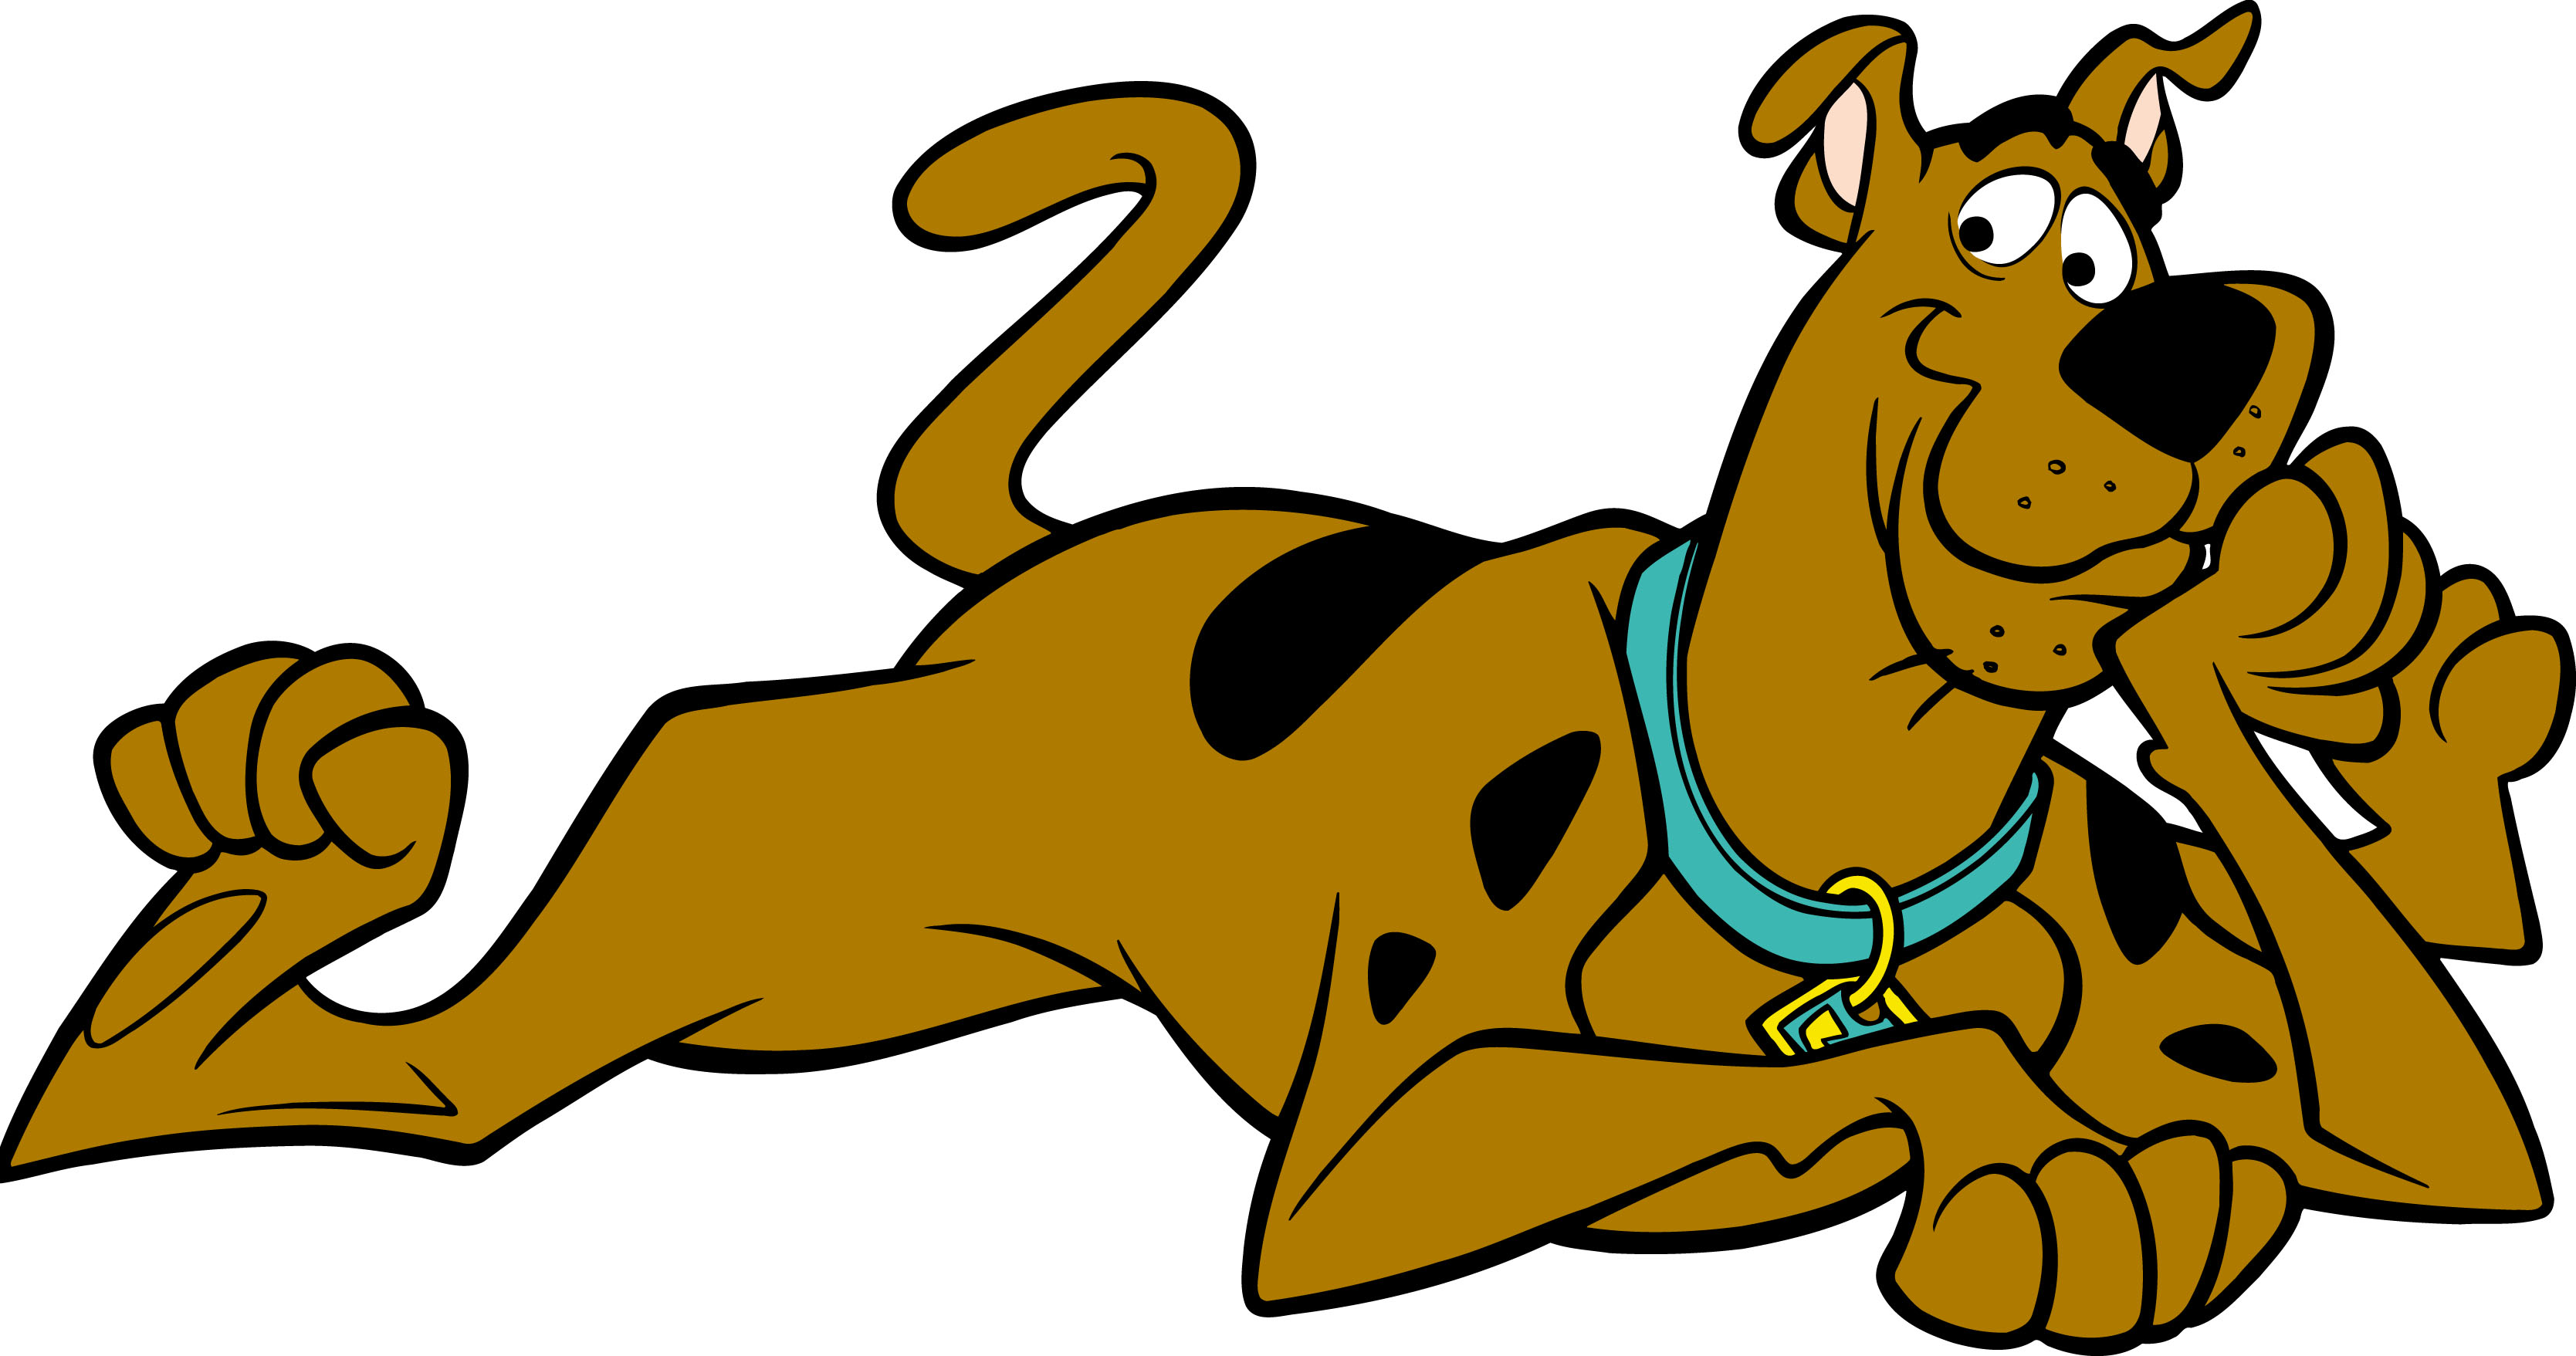 HQ Scooby Doo Wallpapers | File 480.76Kb